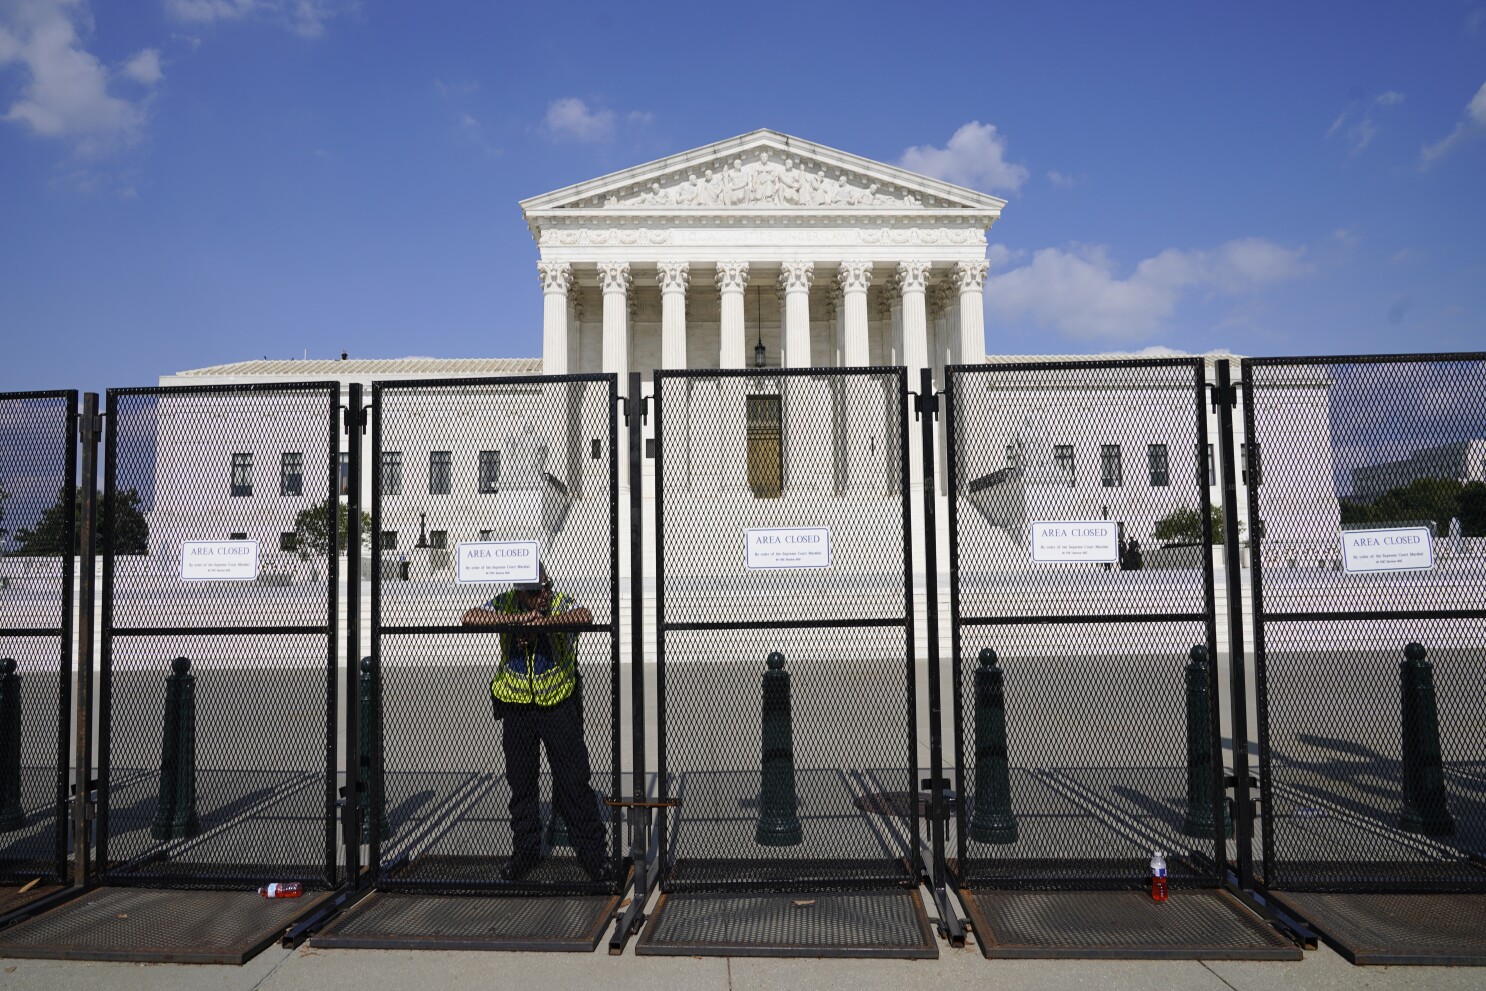 The Supreme Court is poised to cut the heart out of majority rule